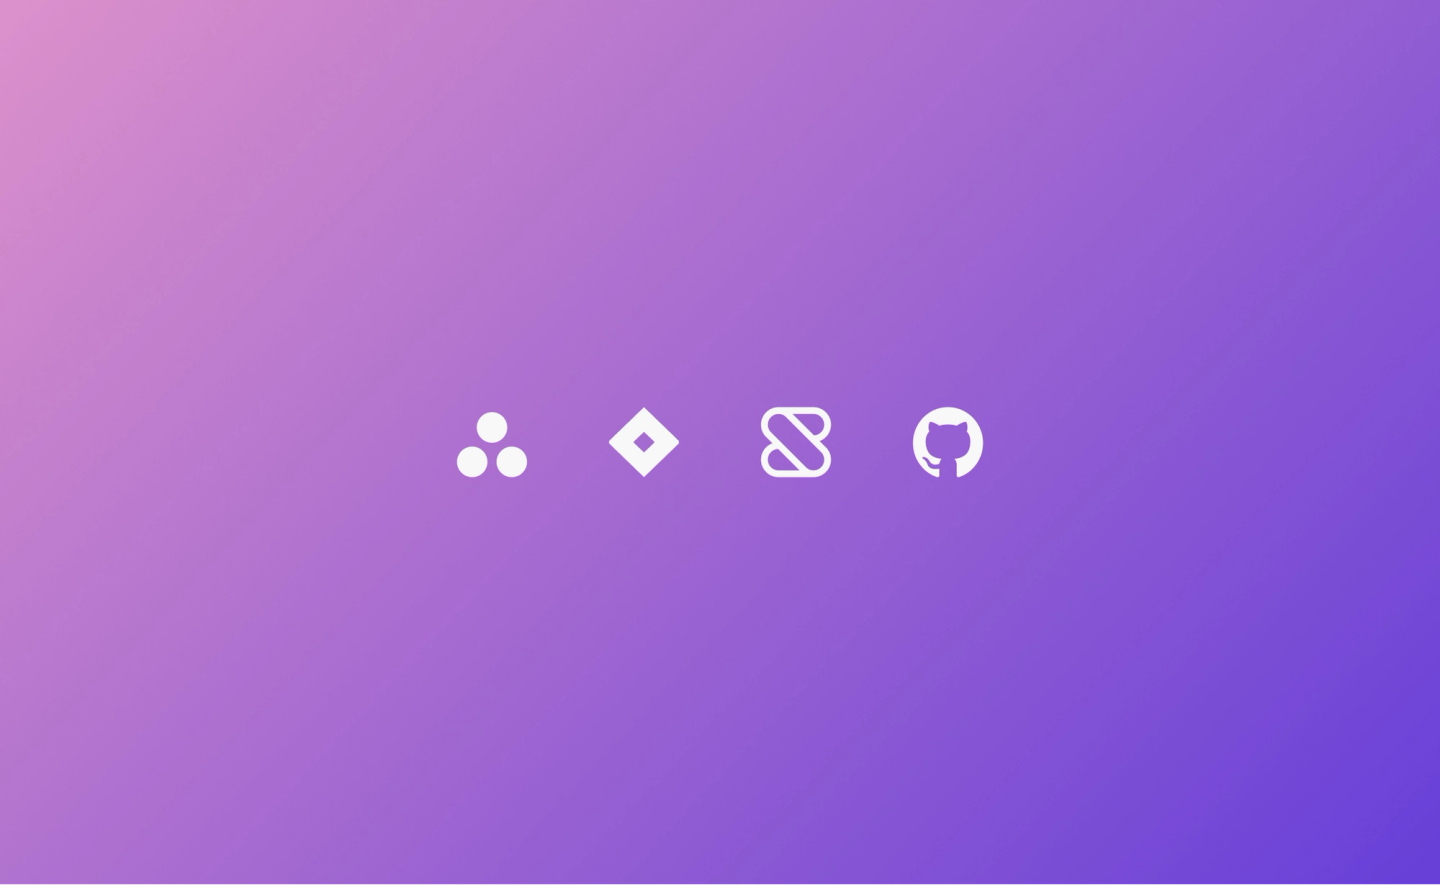 Icons demonstrating services you can import to Linear